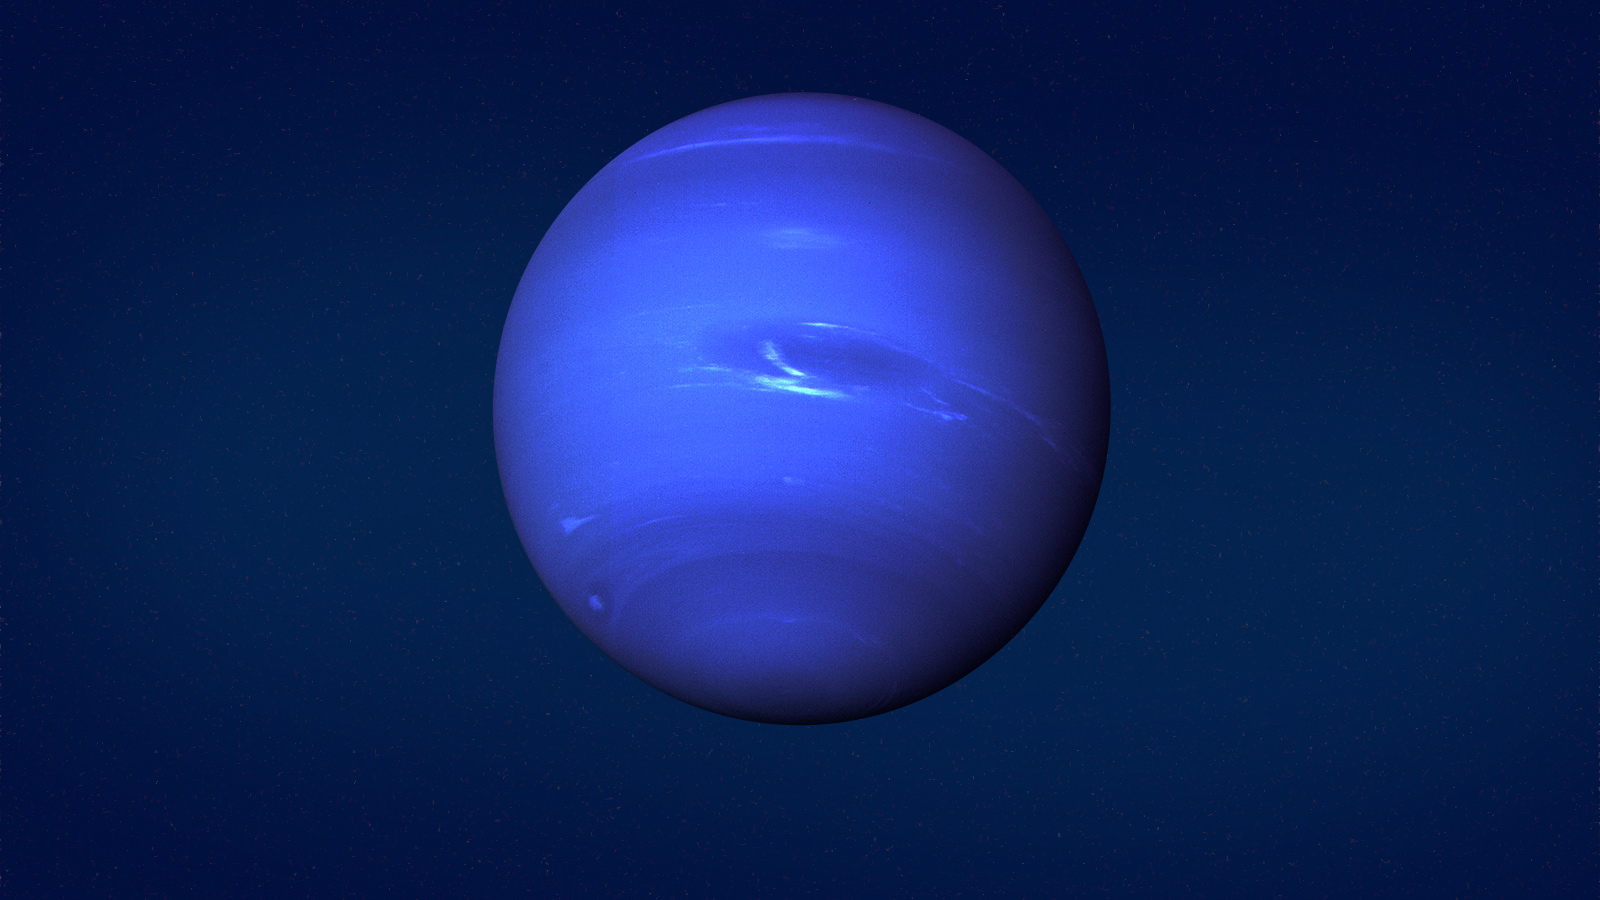 what color is the planet neptune and why is neptunes atmosphere bright blue